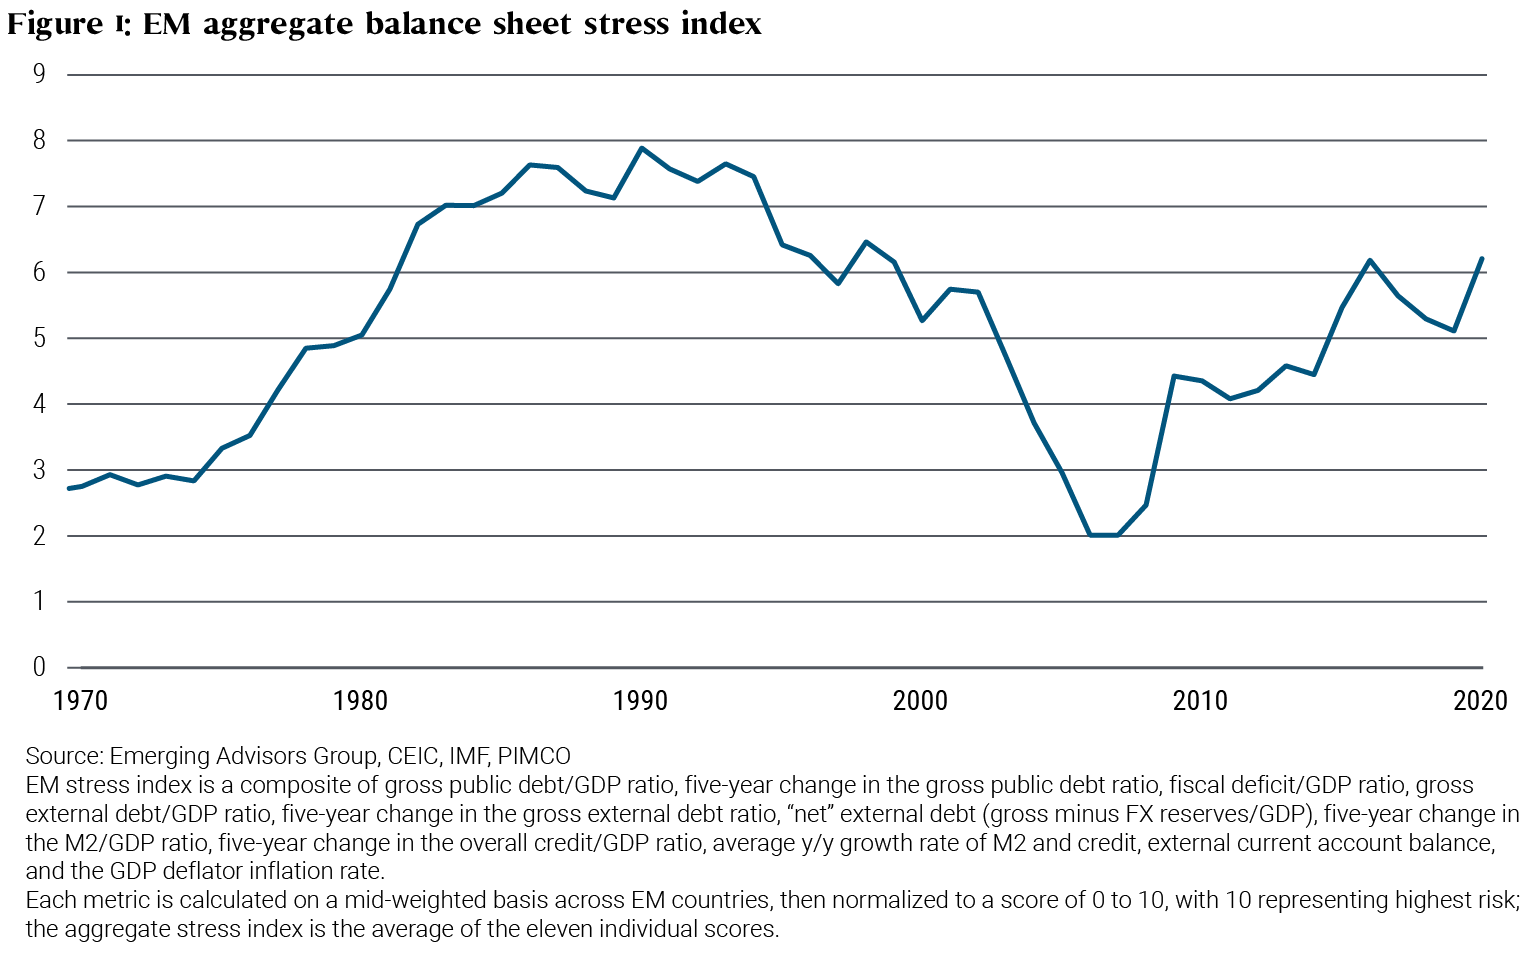 This line graph shows the emerging markets stress index from 1970 through 2020. In 1970 through 1974 the stress index hovered between 2.8 and 2.9. In 1975 it began to climb, peaking at 7.9 in 1990, before trending down to 2.0 in 1990 and 1991. It began to climb in 1992 and sat at 6.2 in 2020, the most recent measurement.